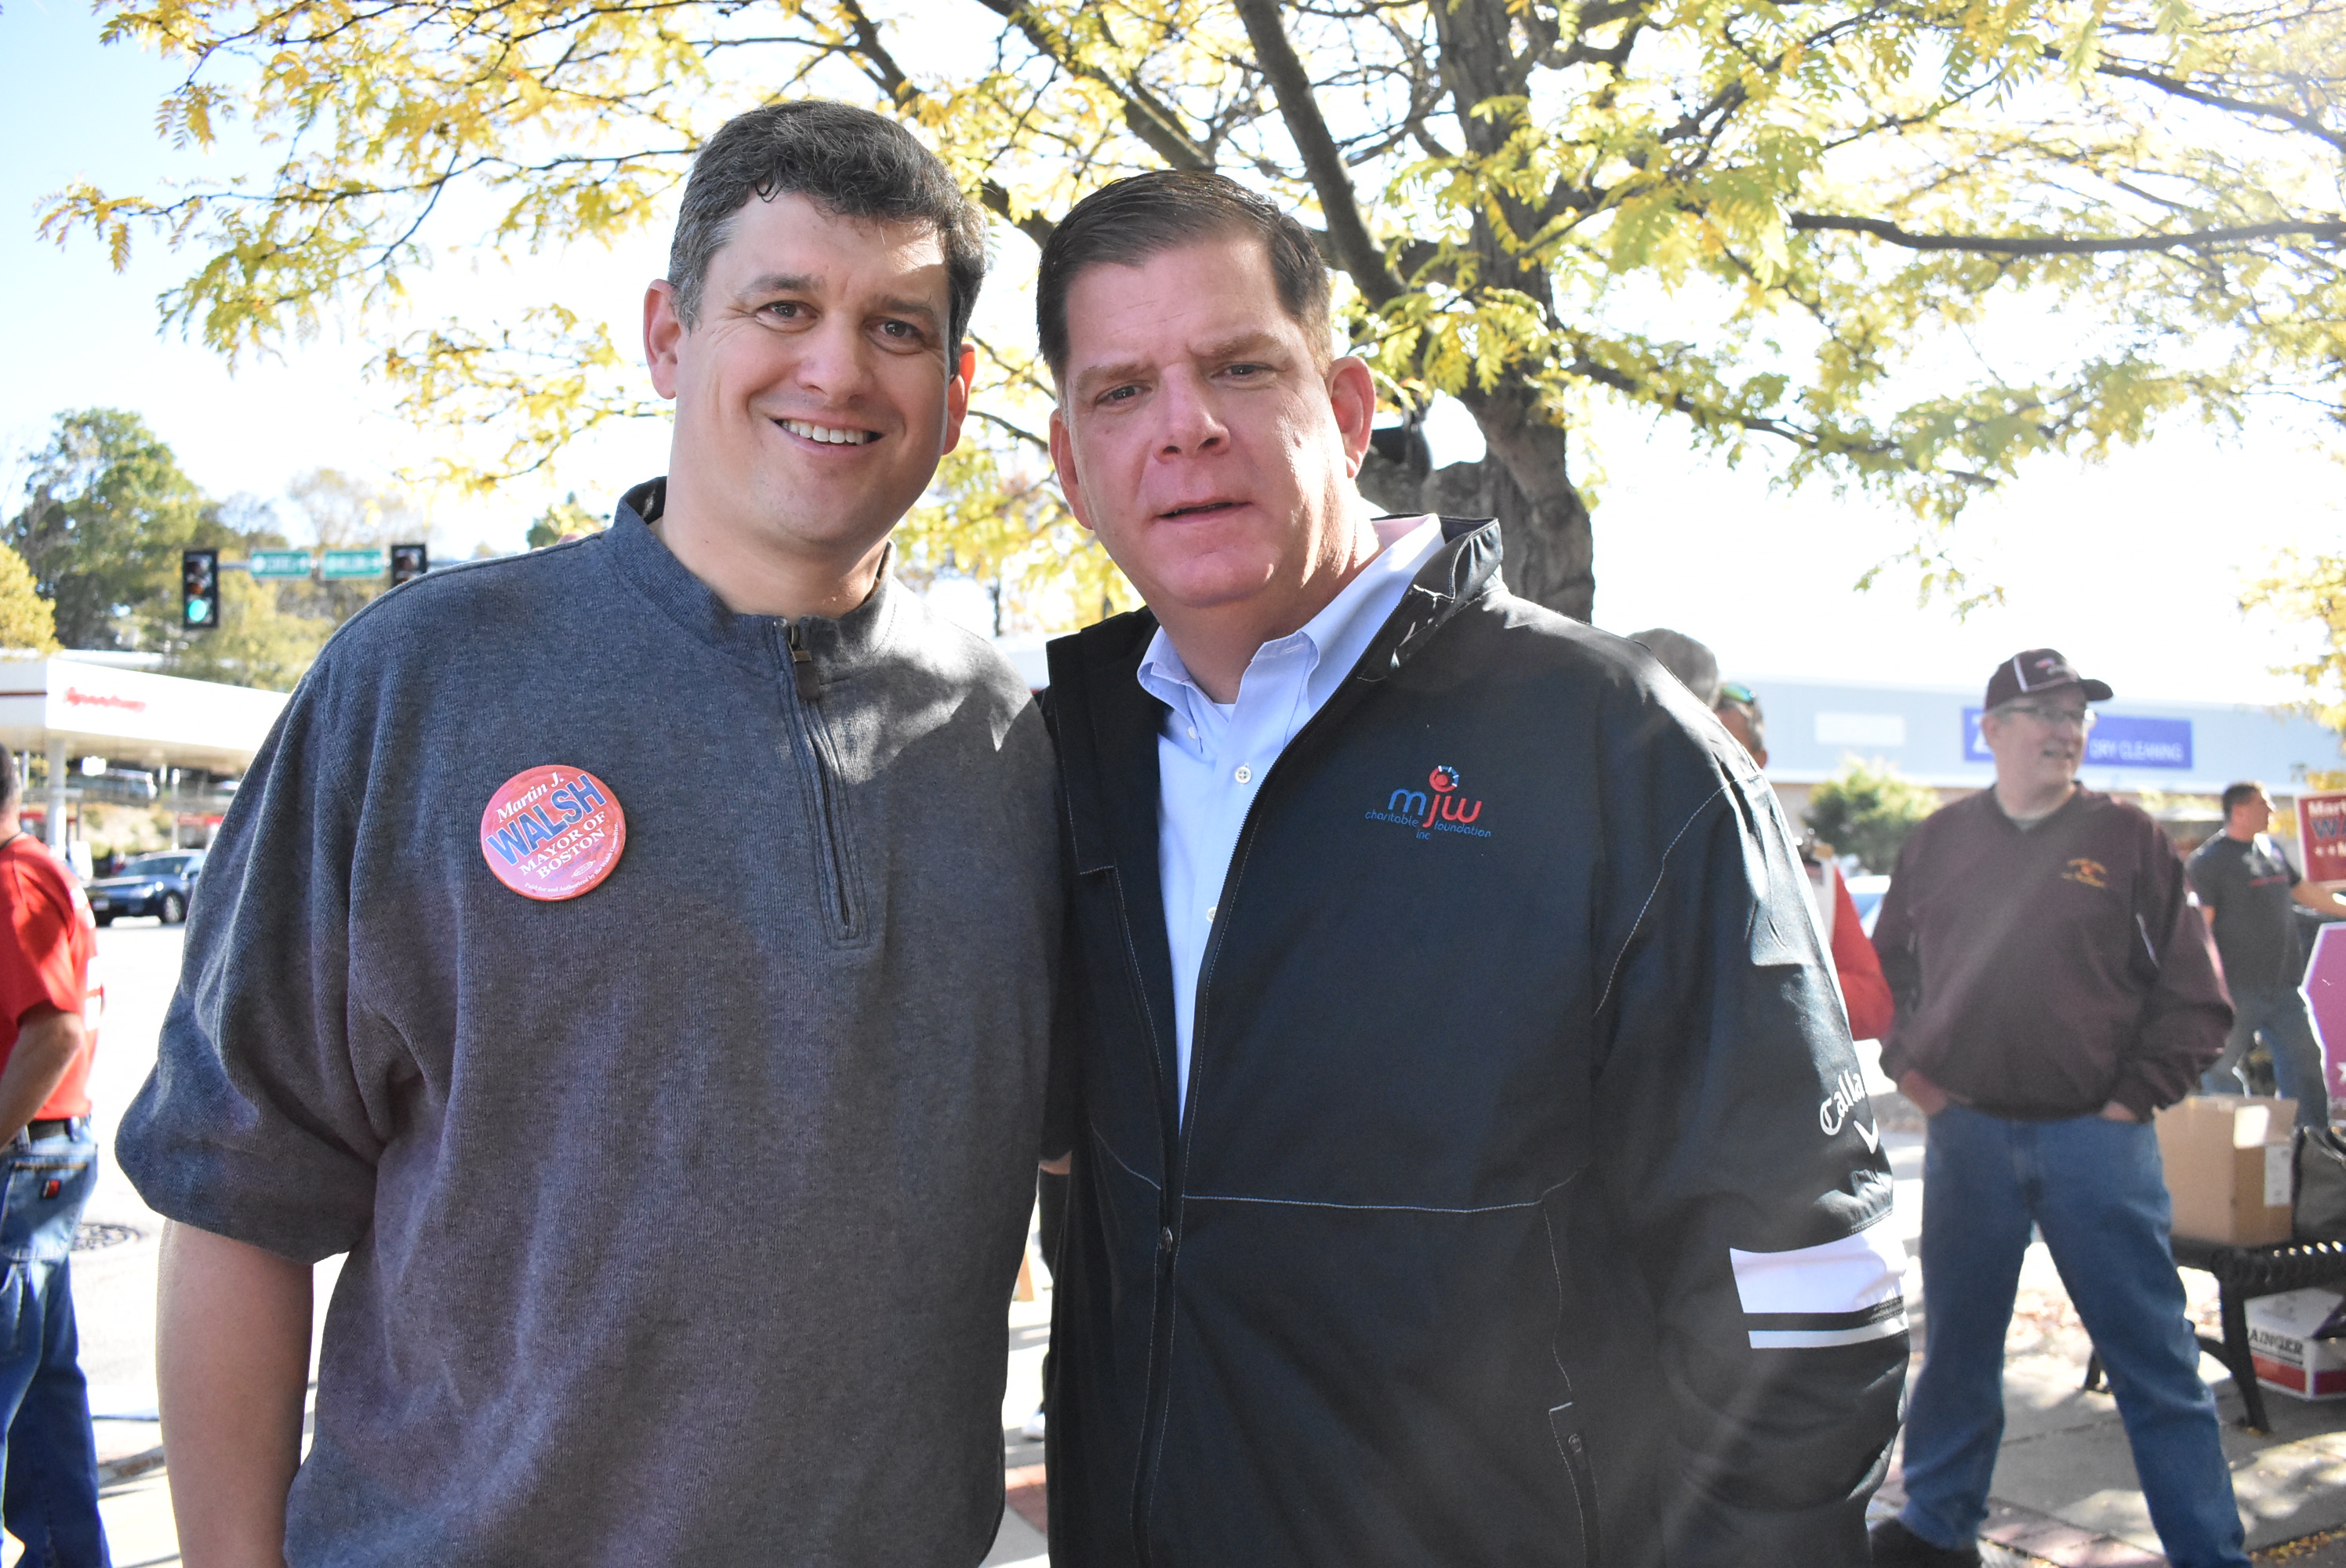 John Connolly with Marty Walsh